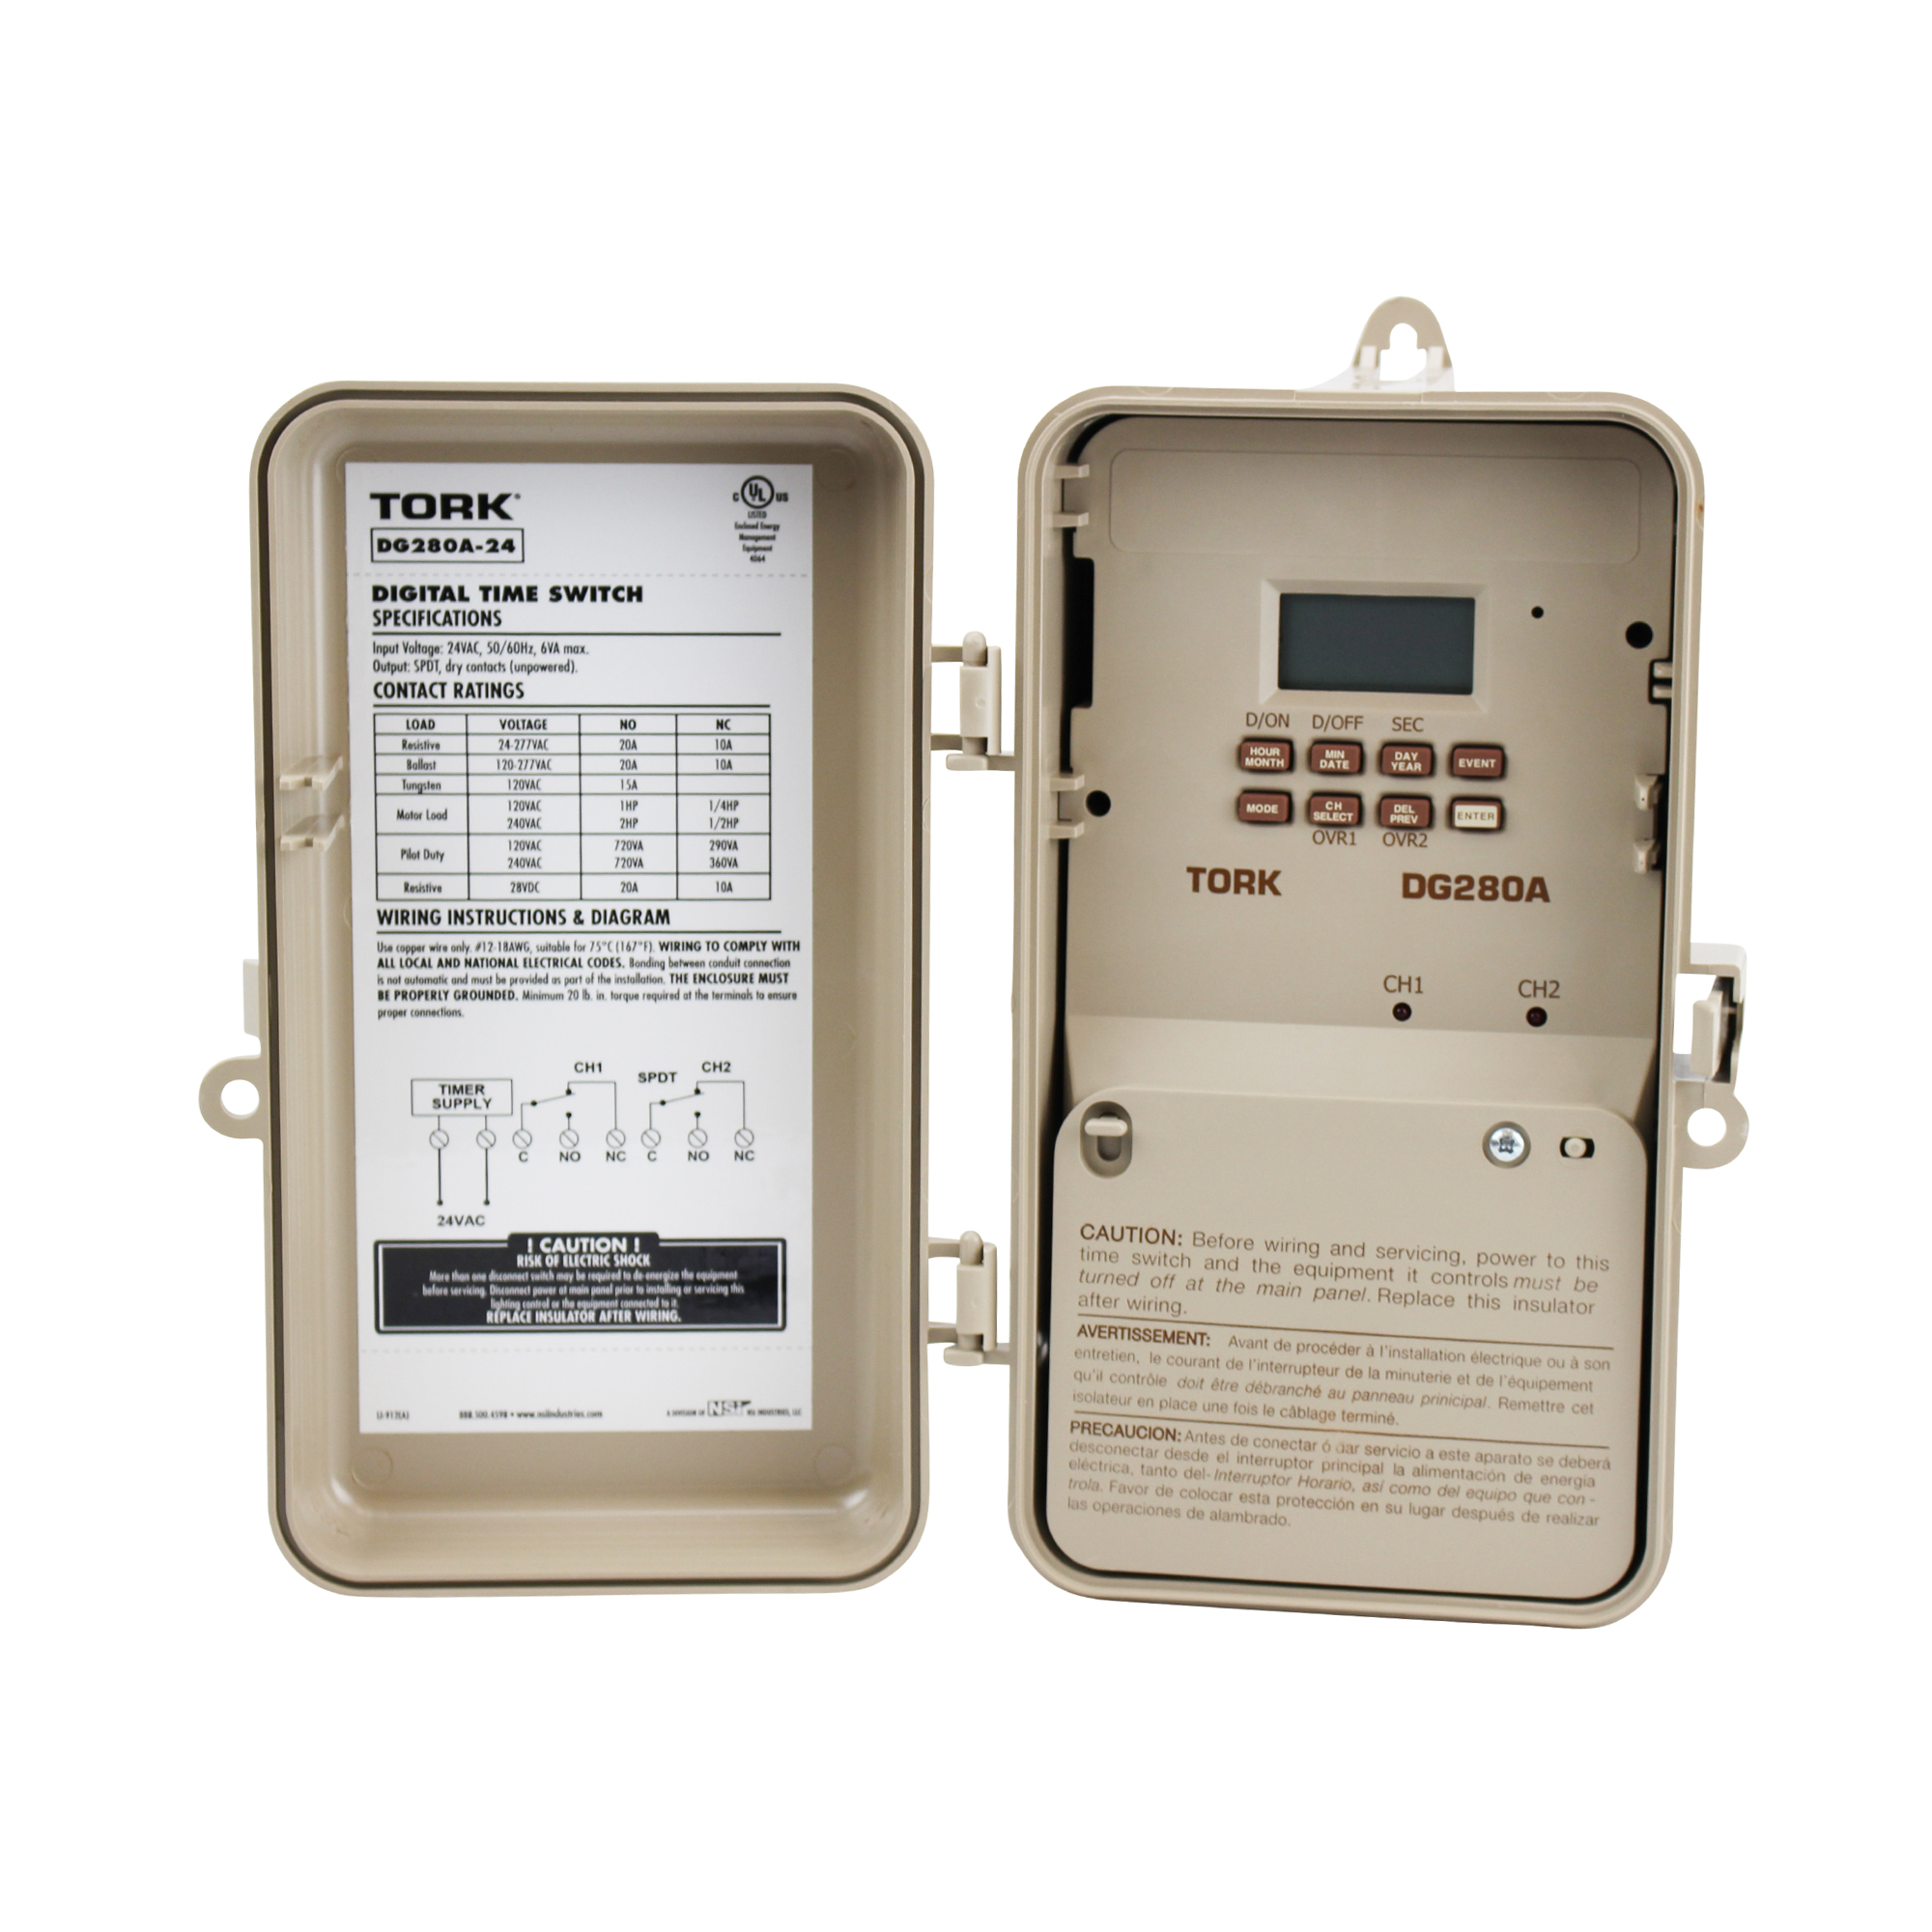 NSI Industries Tork DG280A-24 Signaling and Duty Cycle 24 Hour Time Switch with 2 Channel, 24 VAC 50/60 Hz Input Supply, SPDT Output Contact - image 1 of 4